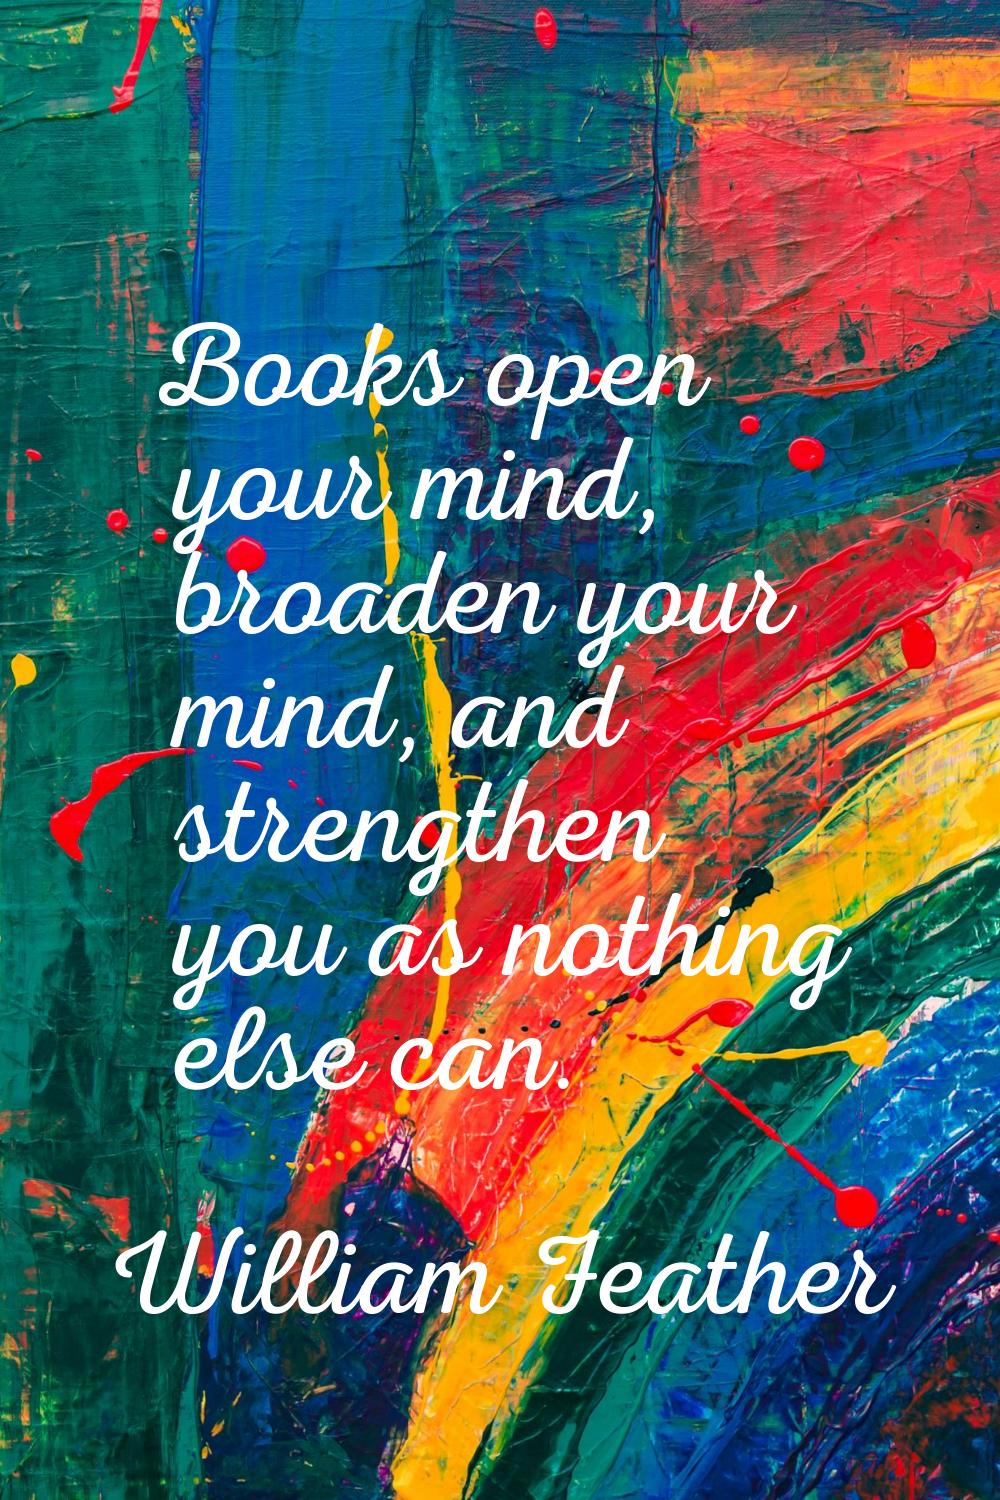 Books open your mind, broaden your mind, and strengthen you as nothing else can.